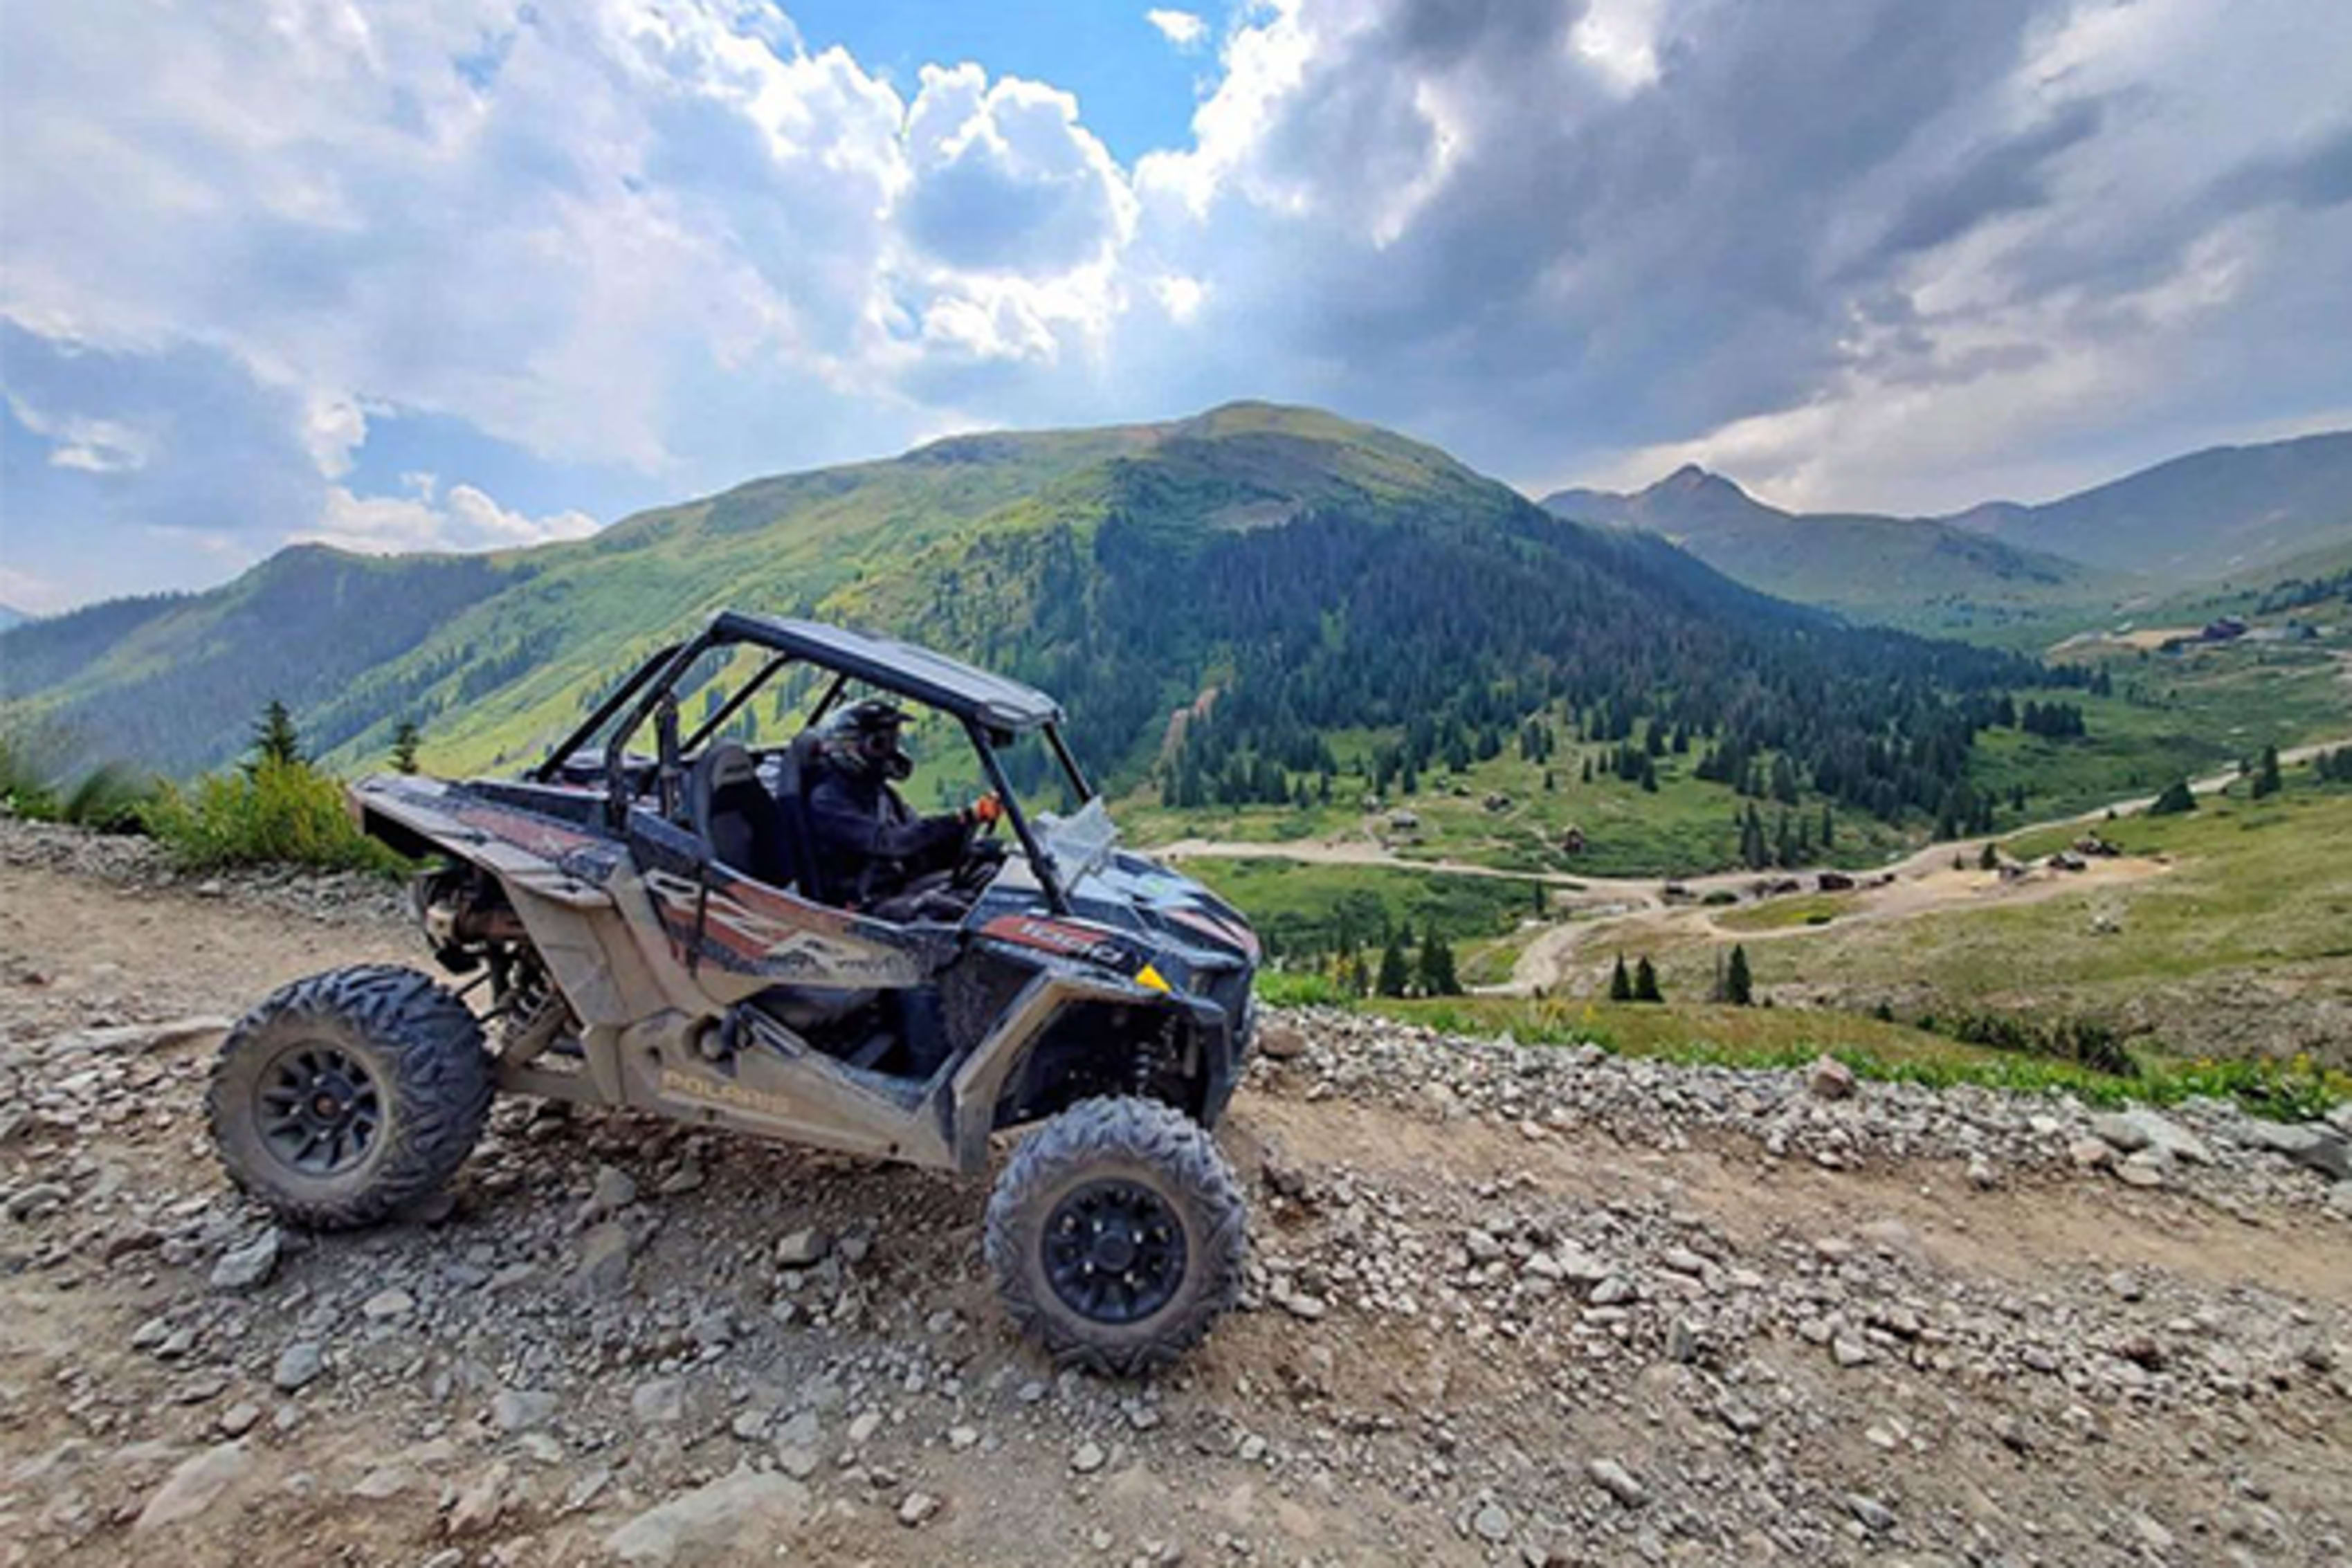 ATV trail at a high mountain point overlooking the mountain scenery